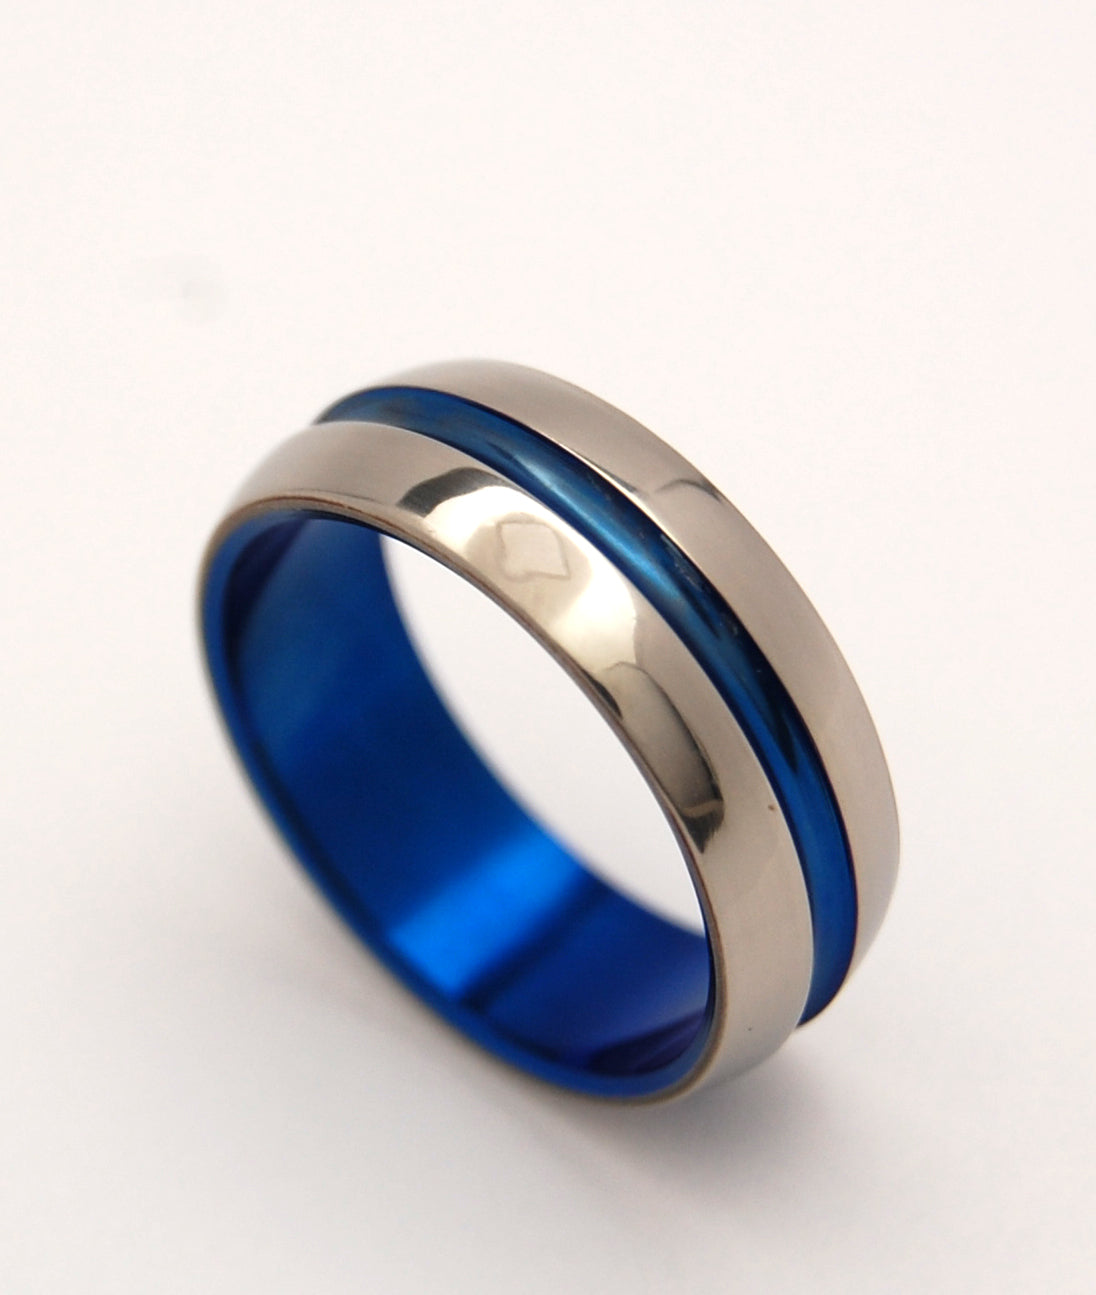 DOMED BLUE SIGNATURE RING | Blue Anodized Titanium Men's Wedding Rings - Minter and Richter Designs